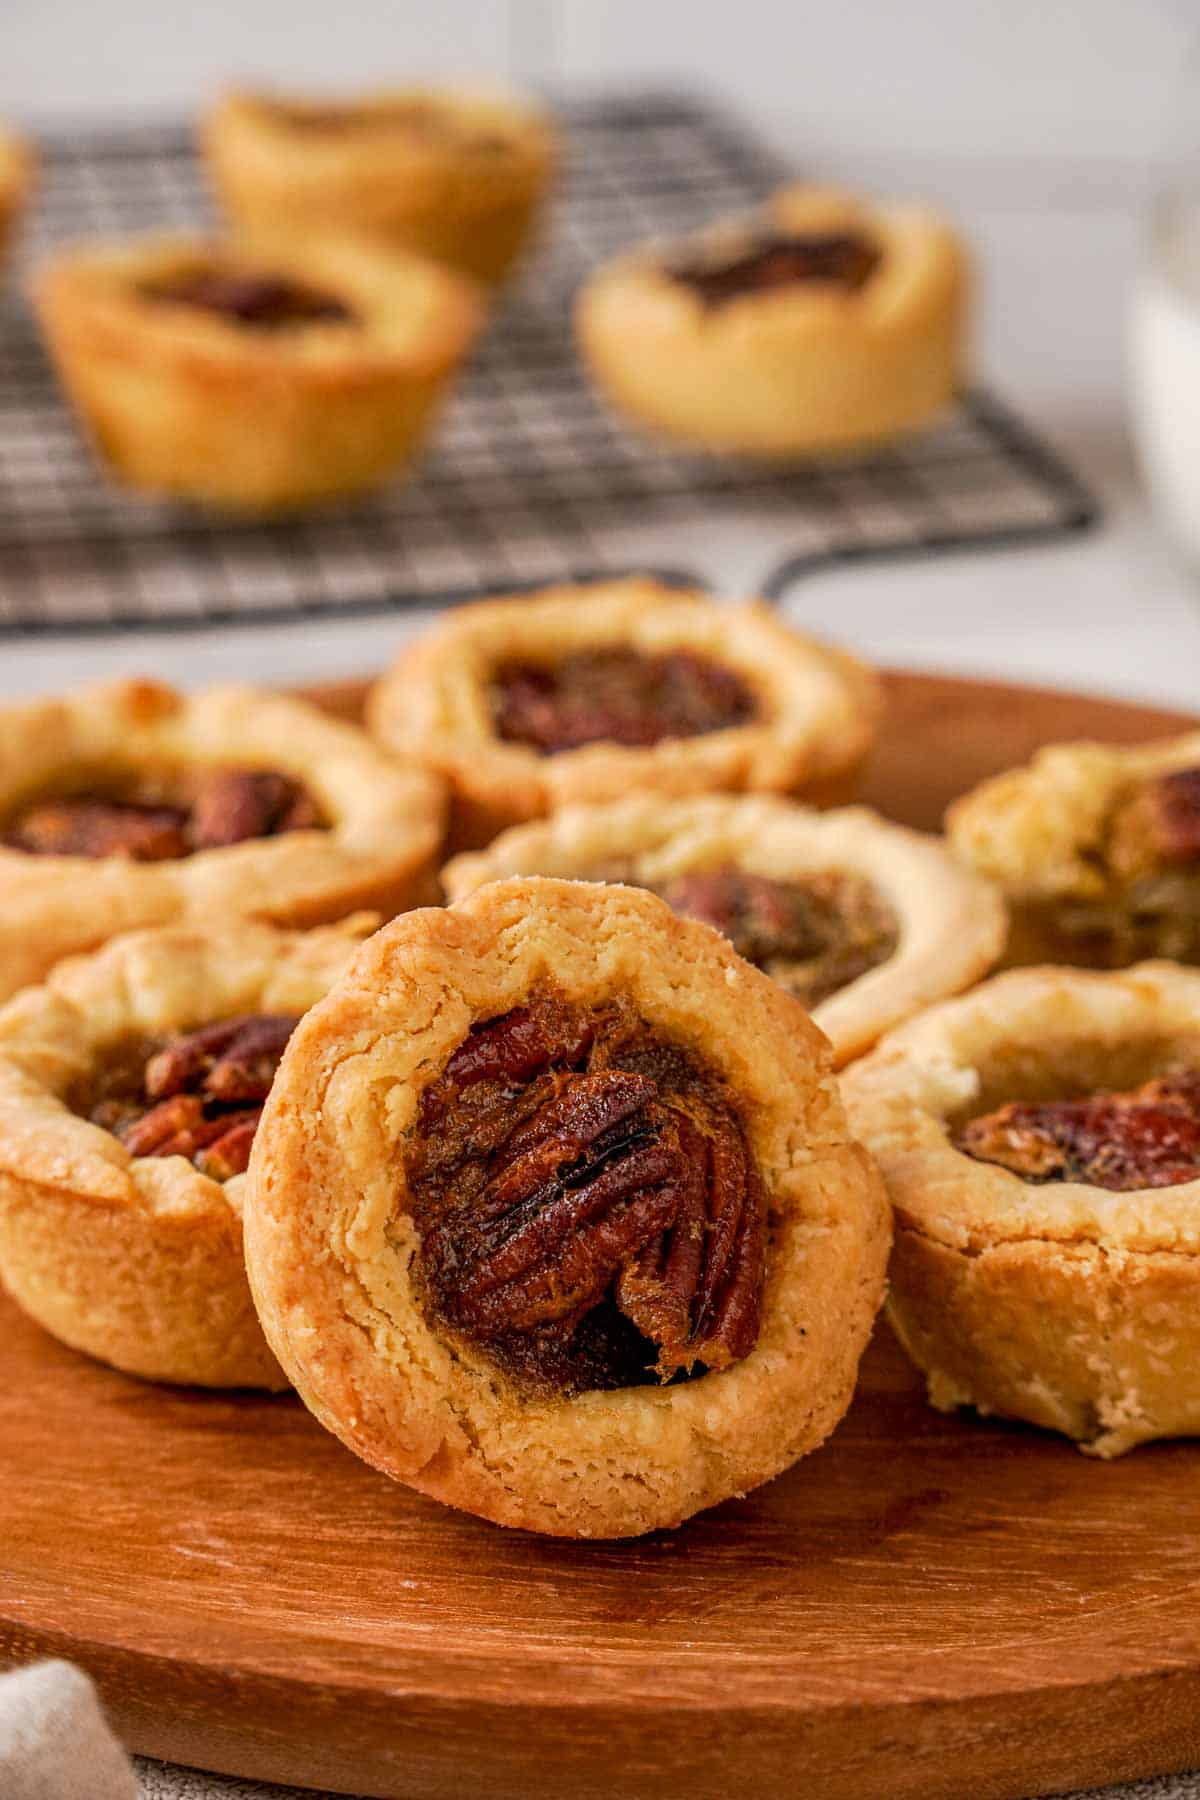 A butter tart propped up against under tarts to show the filling.